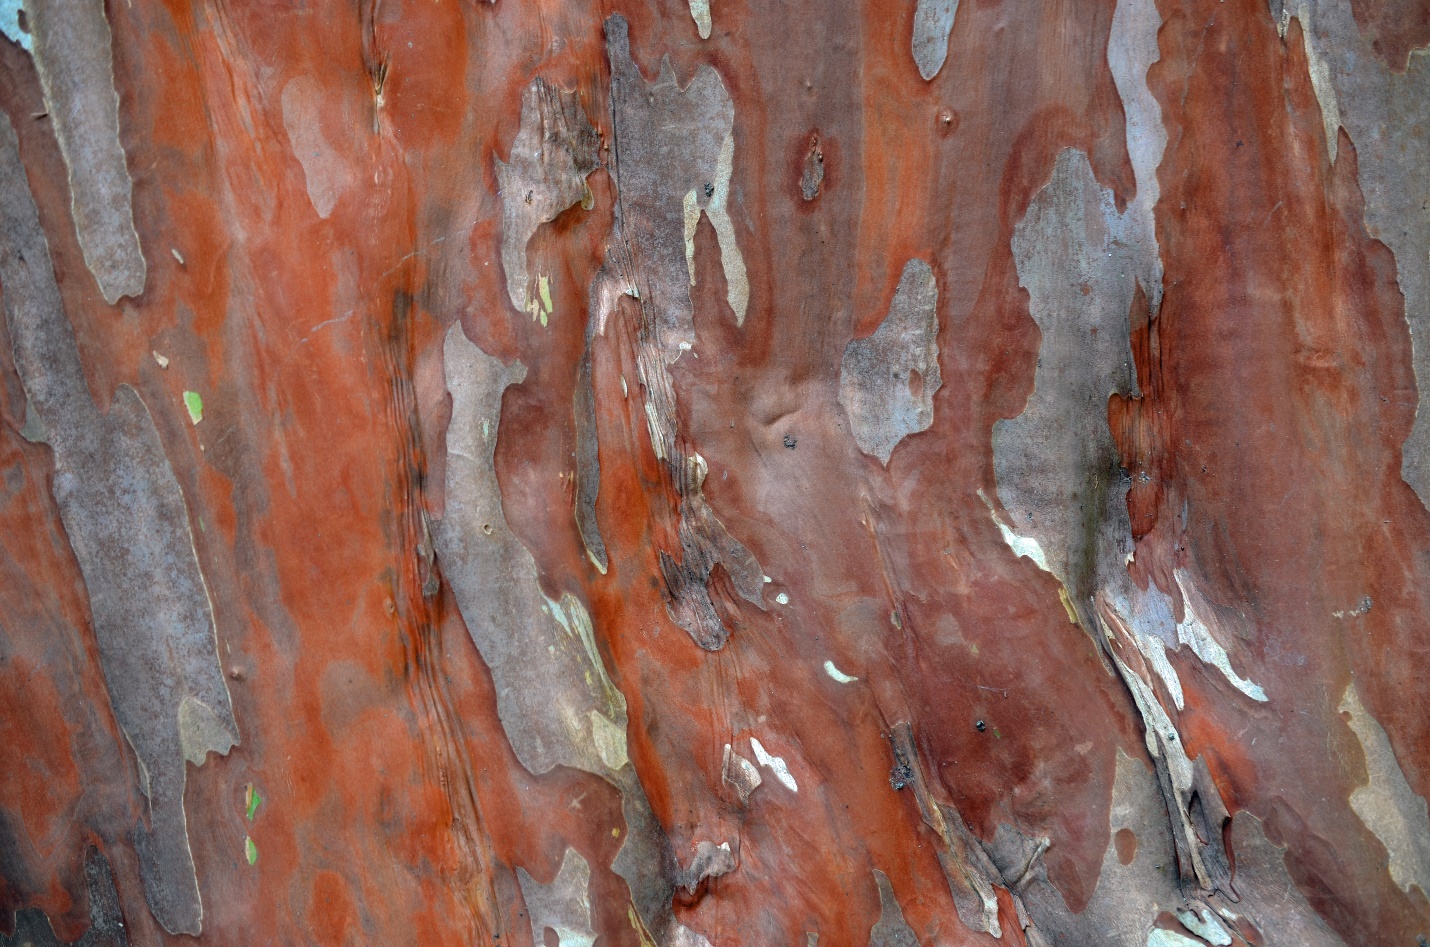 A close-up picture showing the beauty of crapemyrtle bark.